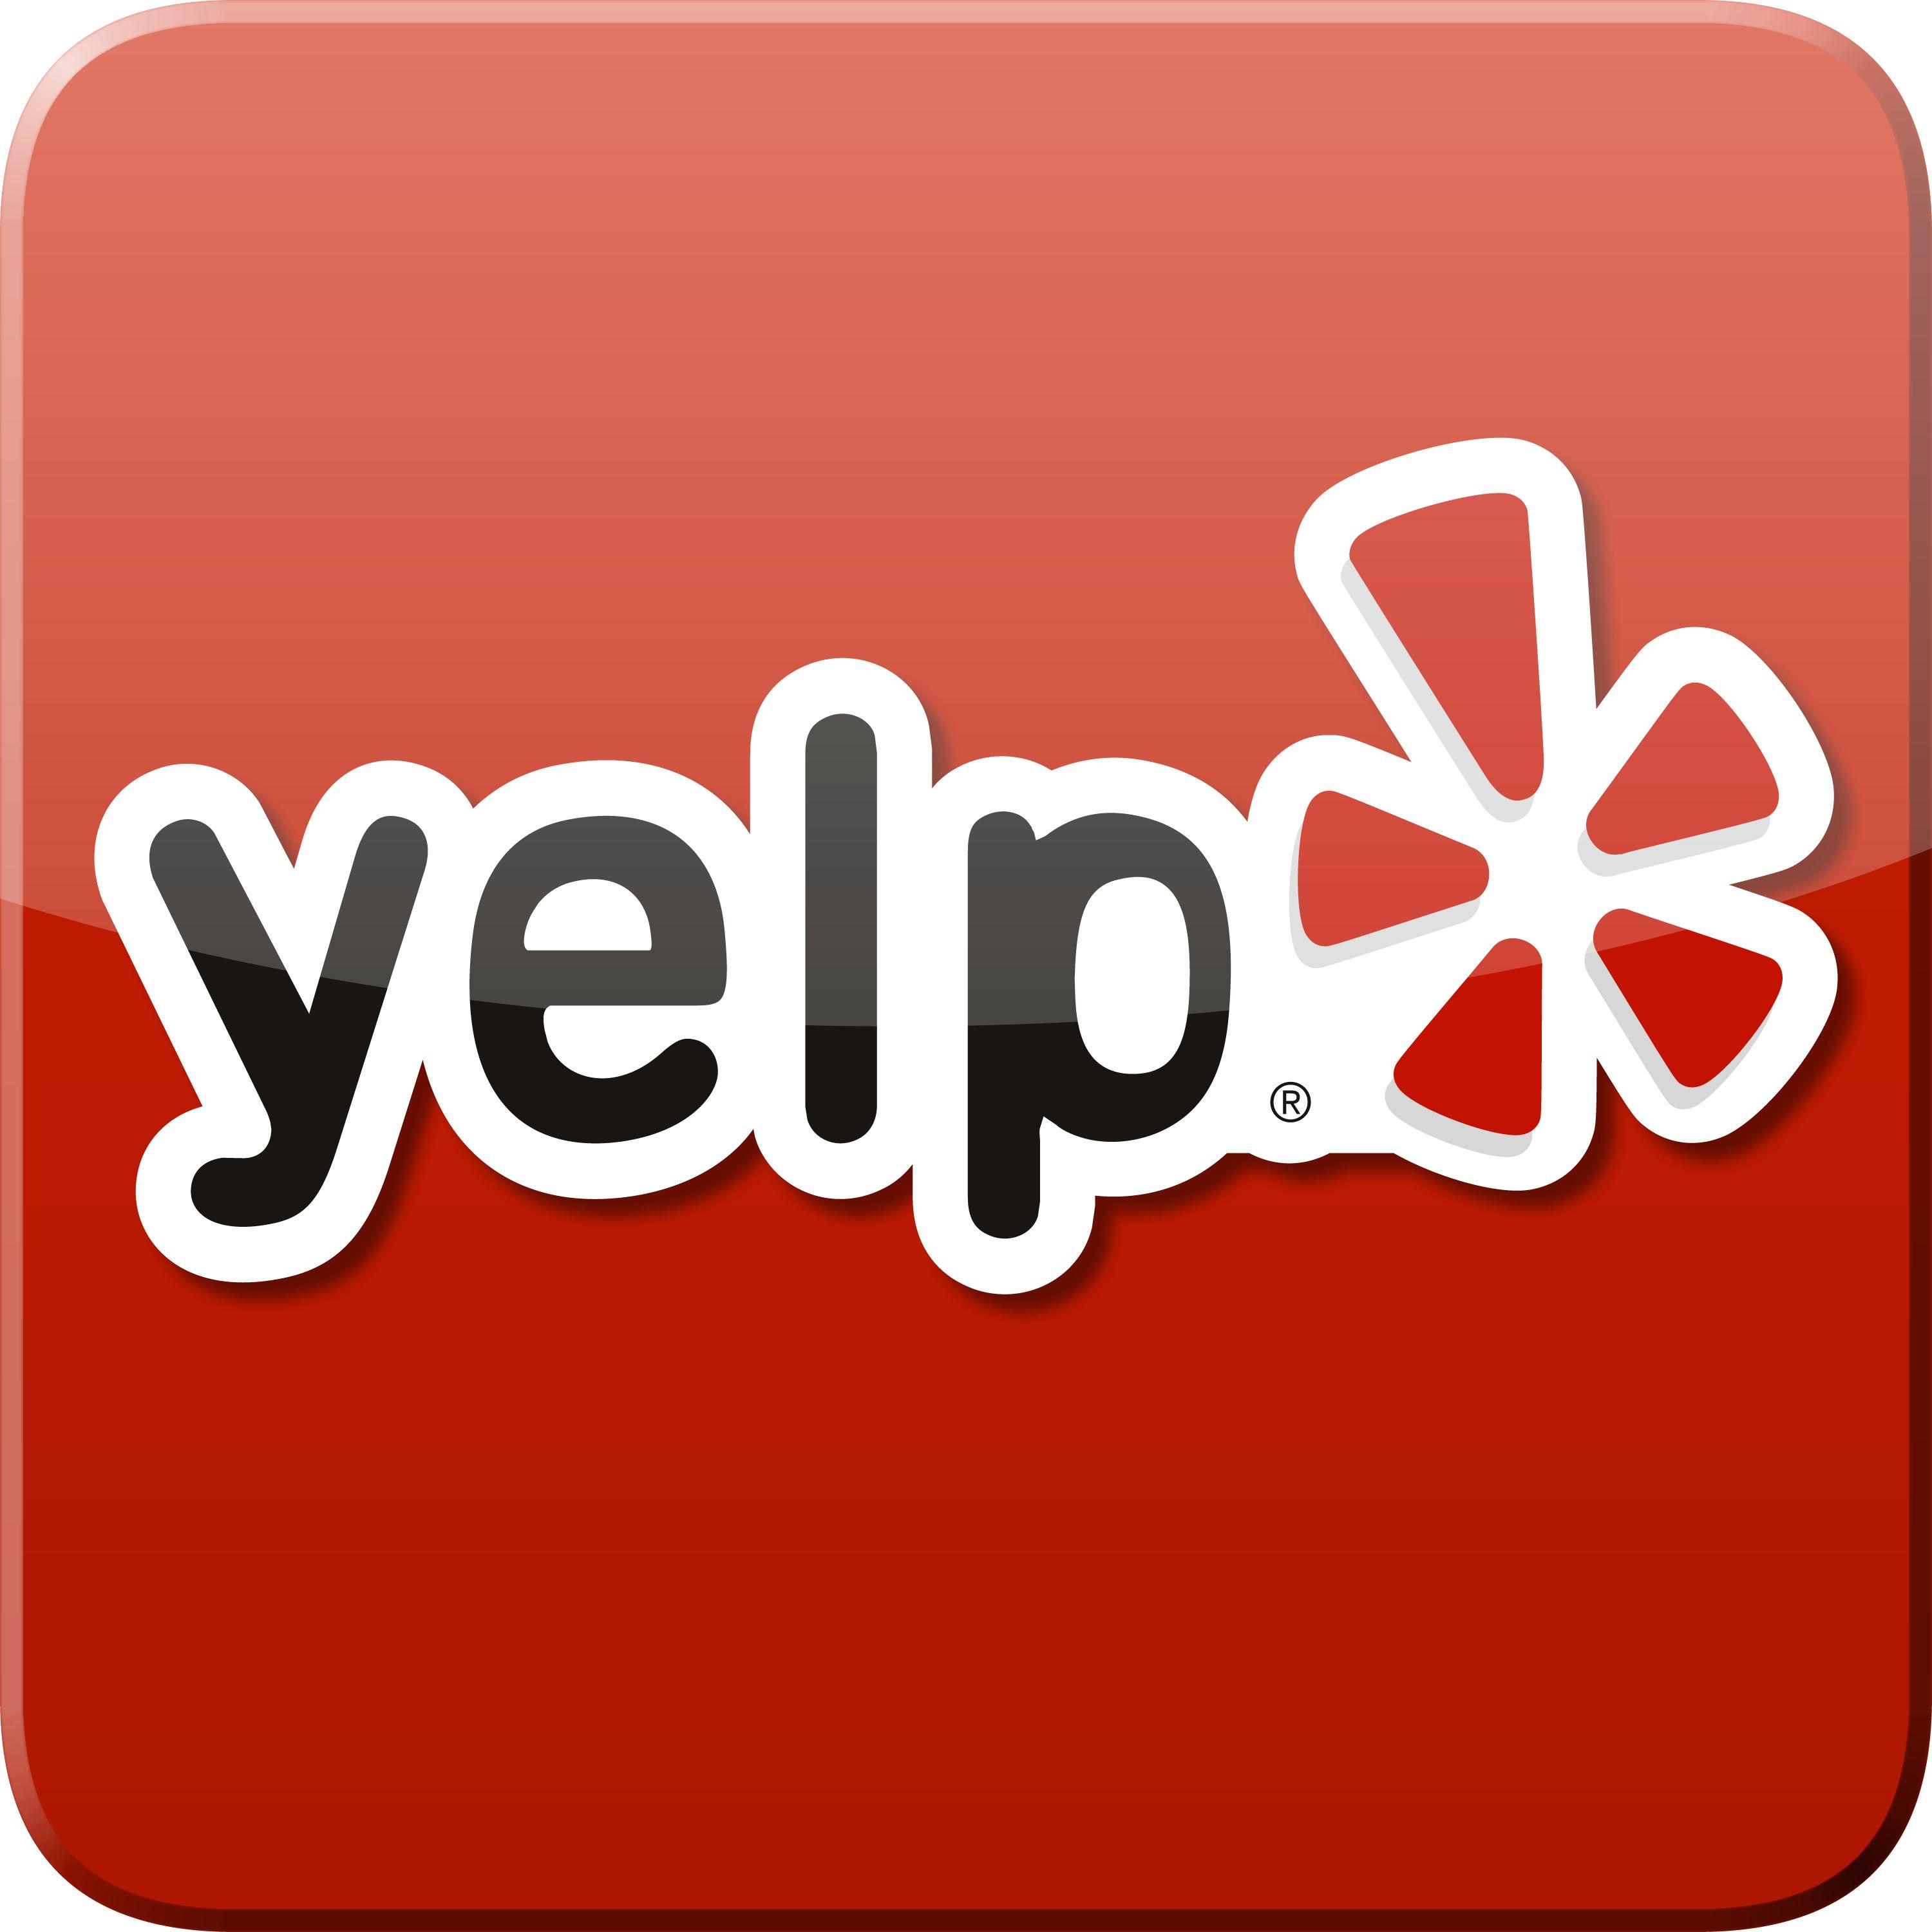 Yelp Square Logo - DIY Content Marketing: Yelp Yourself